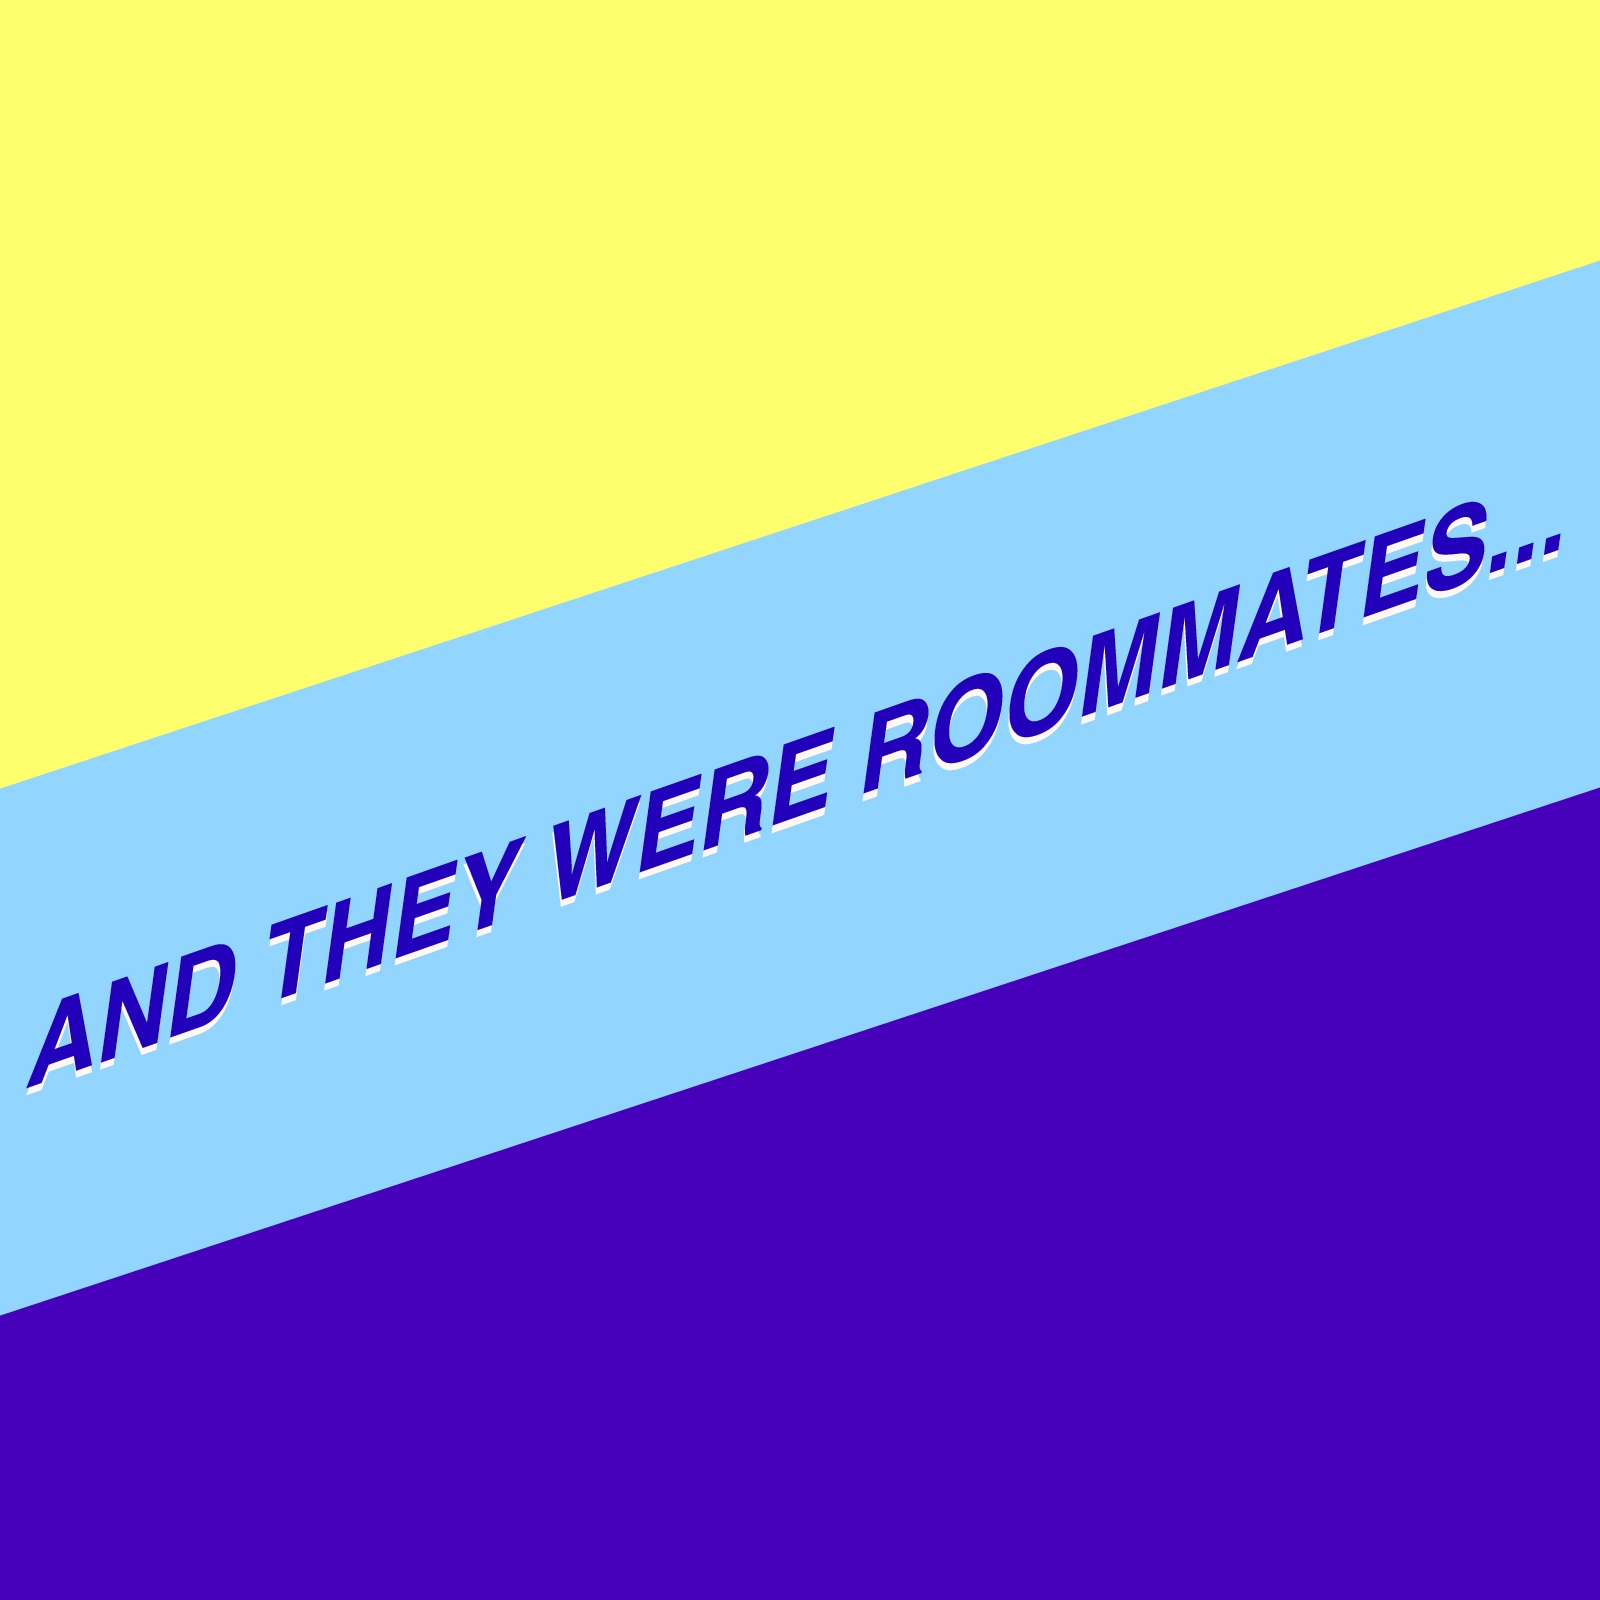 And They Were Roommates...